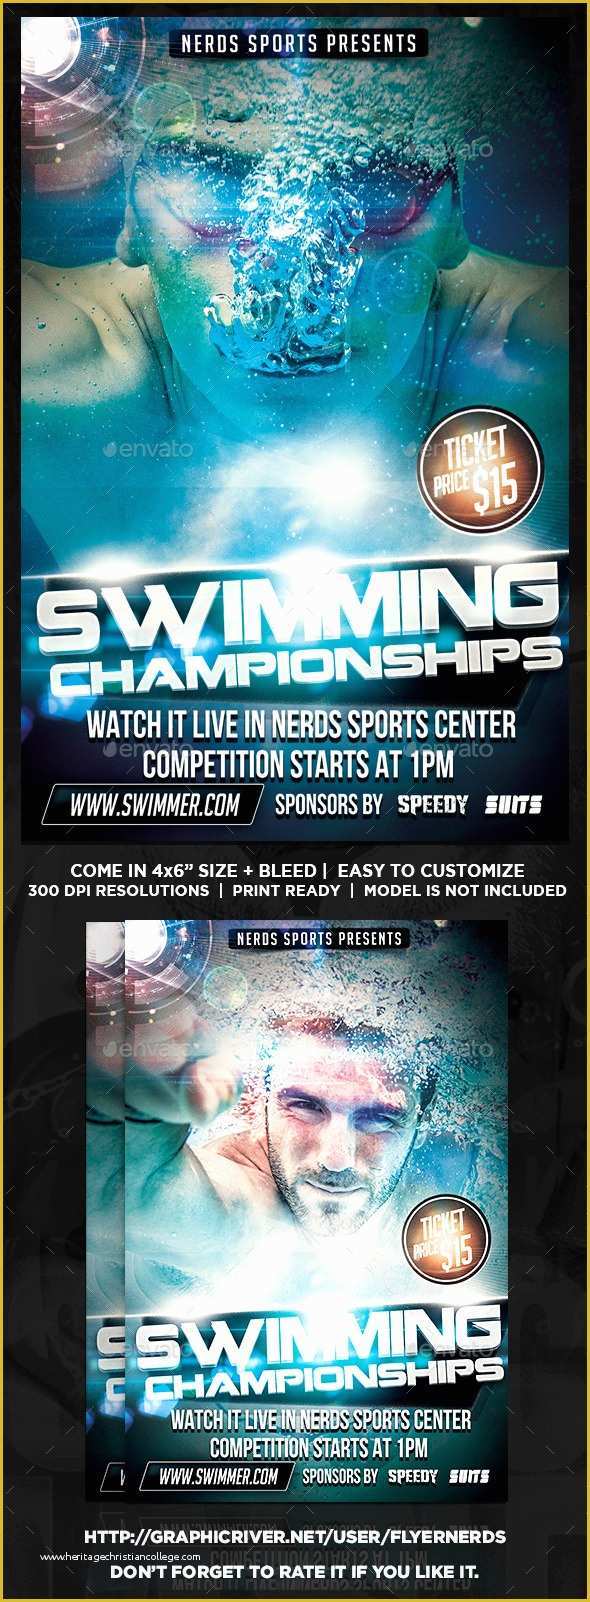 Swimming Flyer Templates Free Of Swimming 2k15 Championships Sports Flyer by Flyernerds